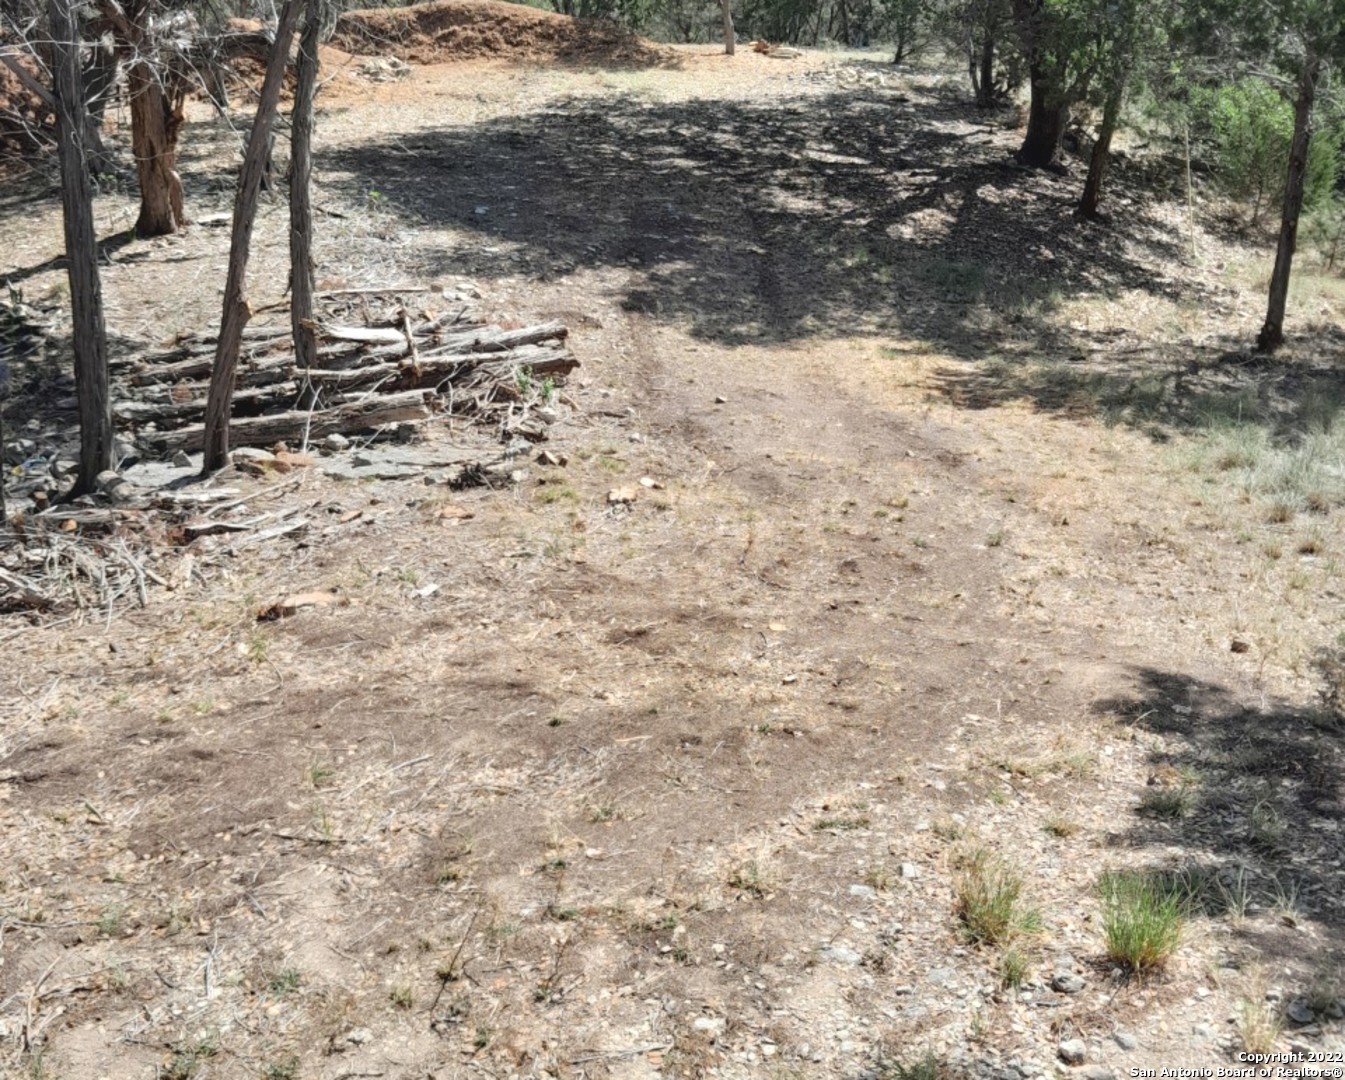 a view of a dry yard with trees